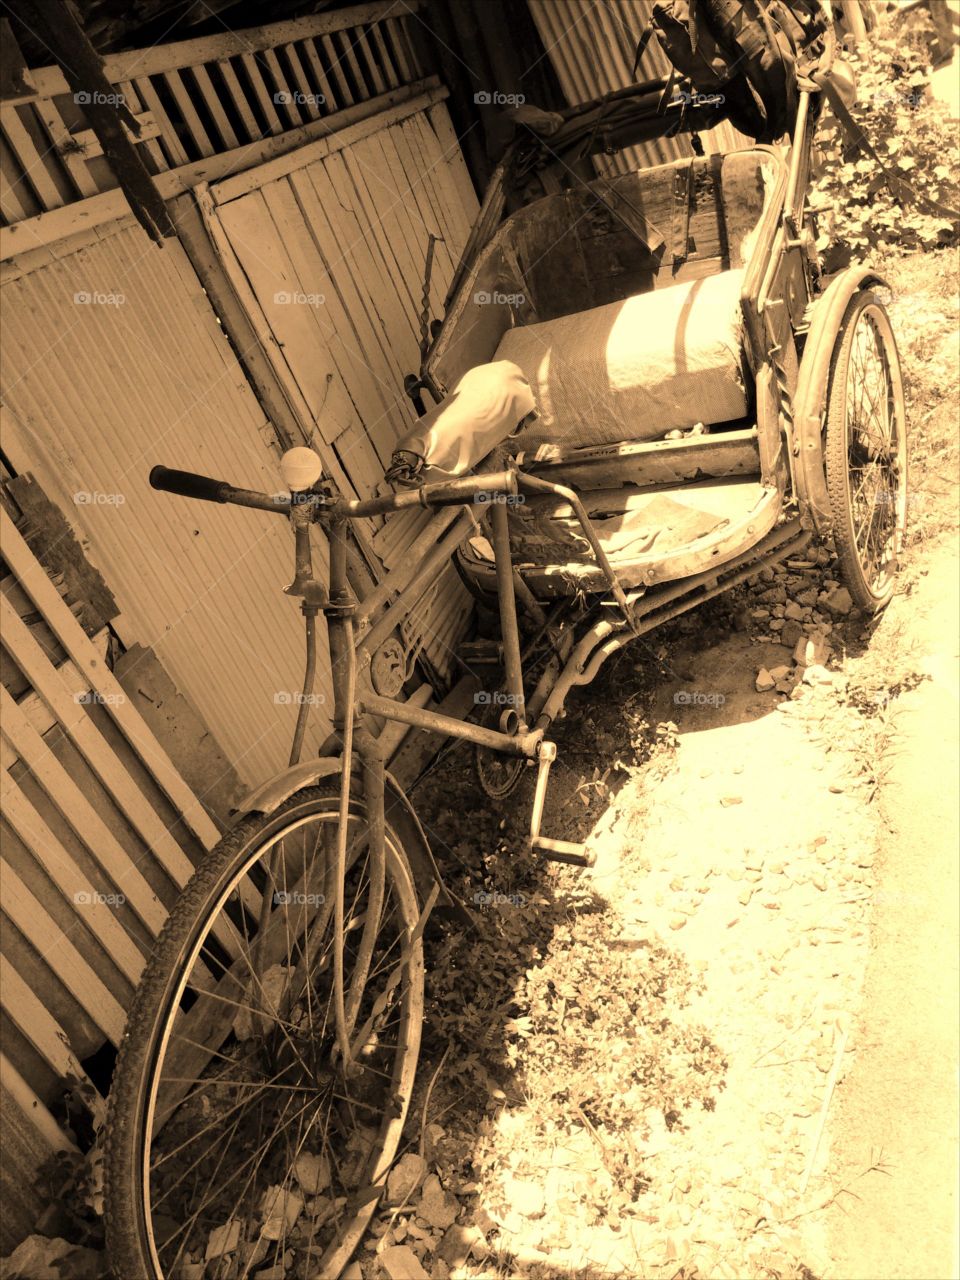 The tricycle. the old tricycle at Thailand